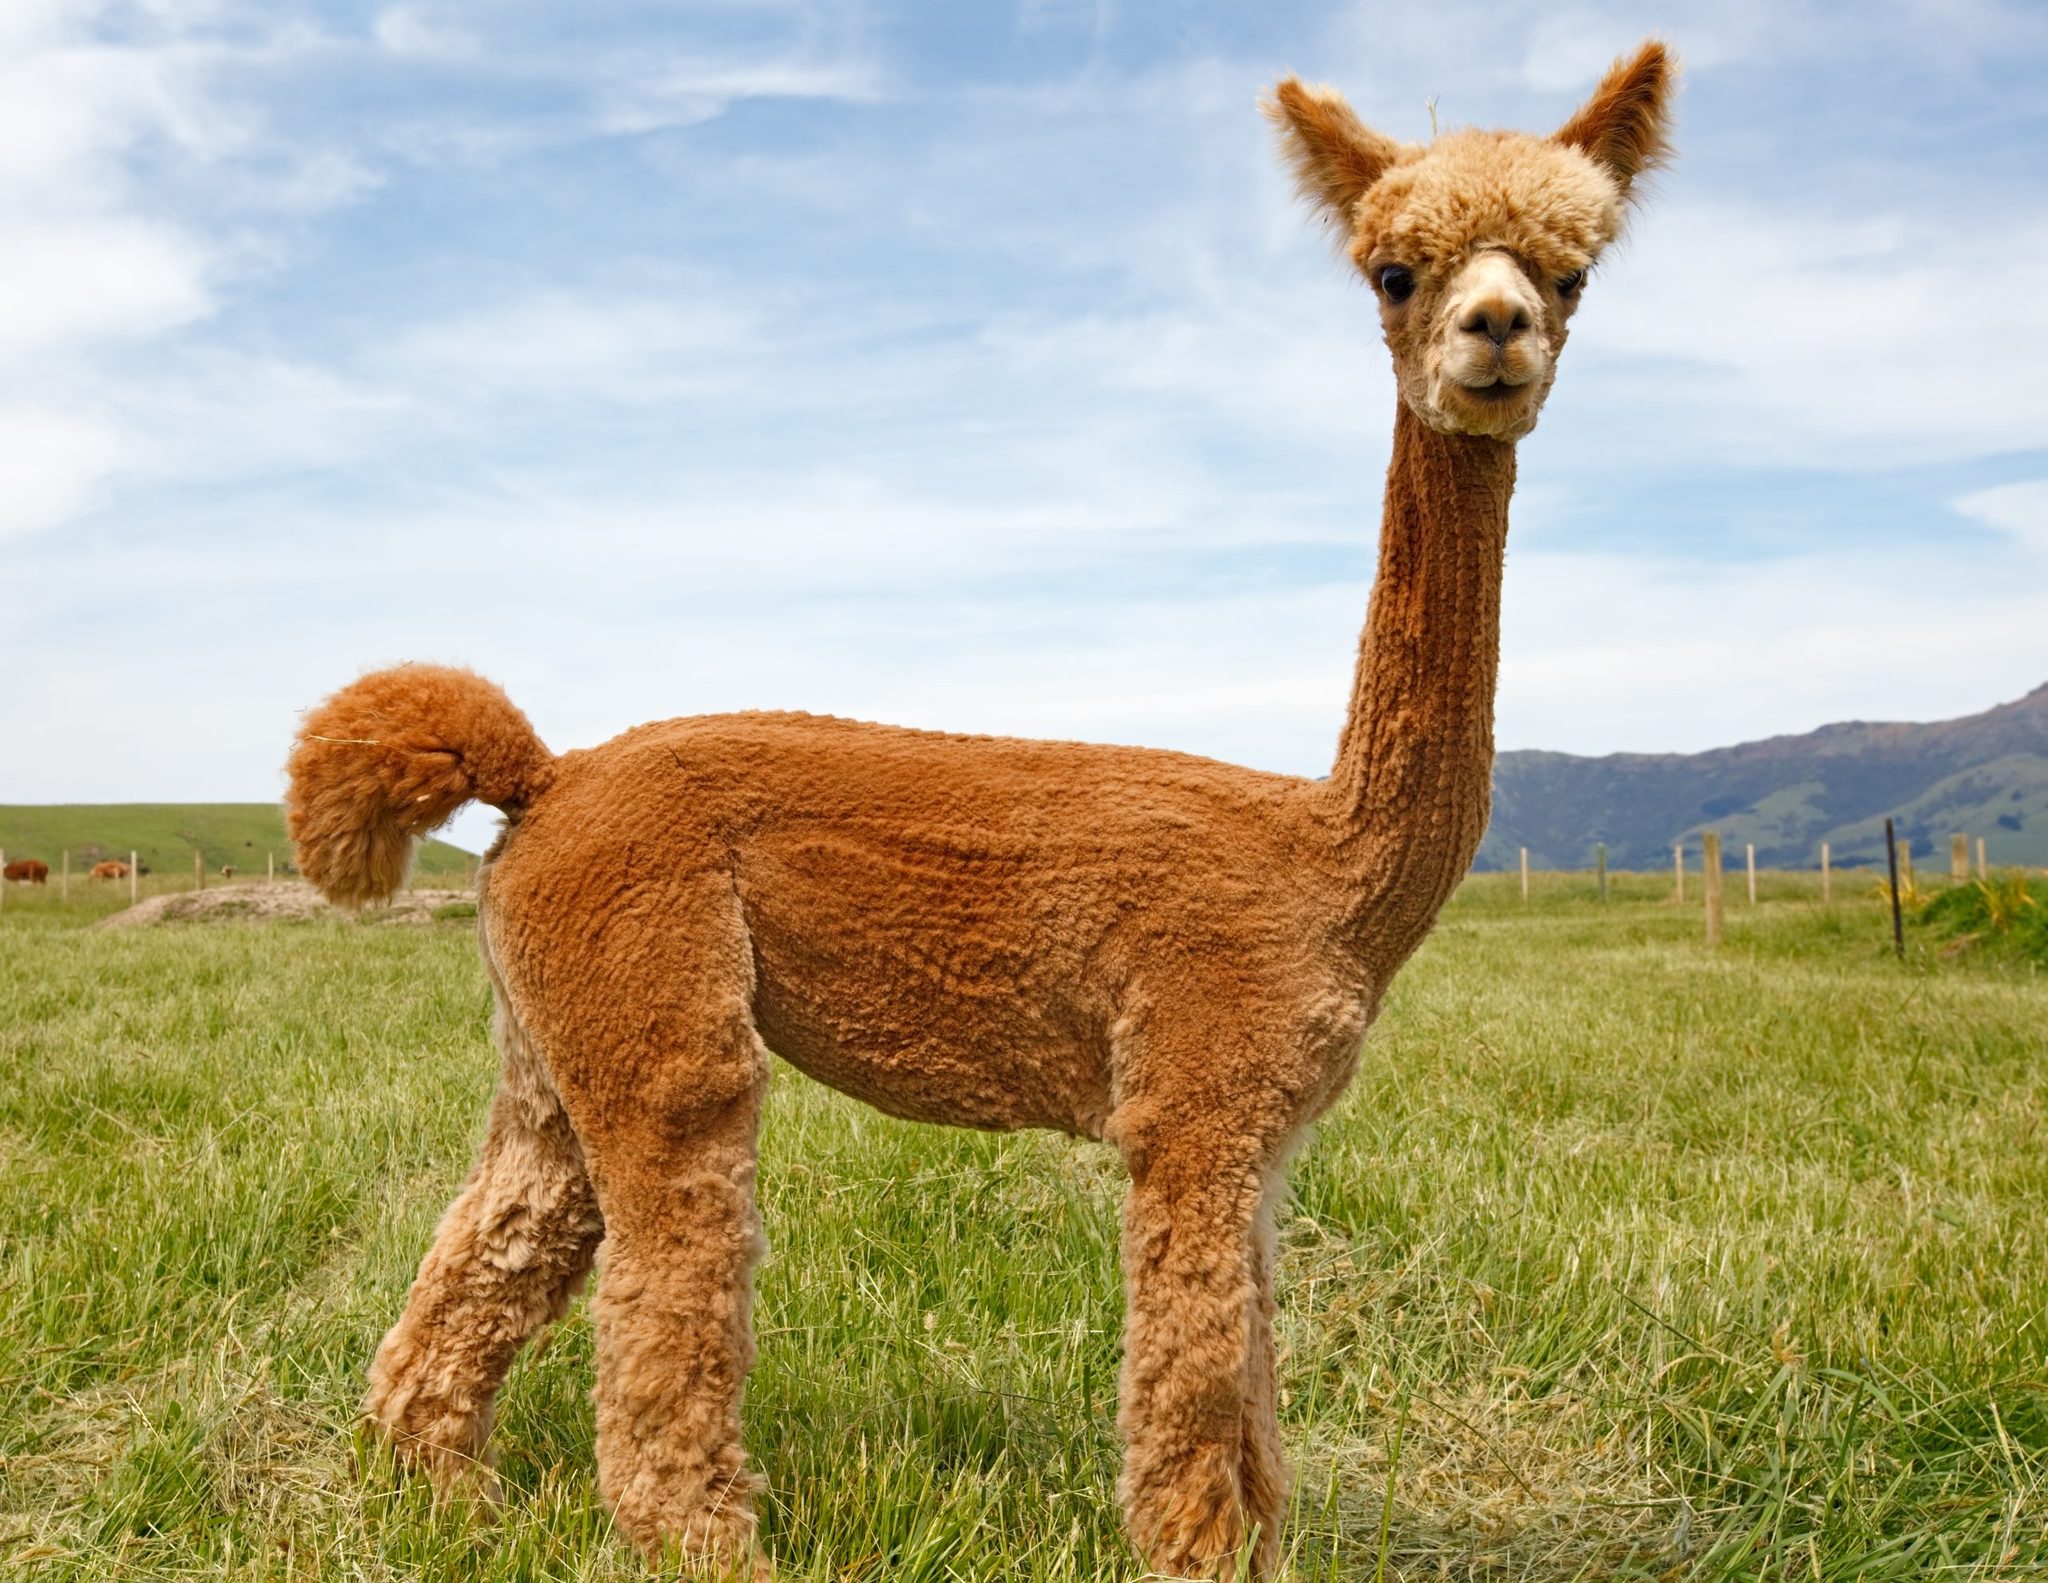 40 Adorable Alpaca Photos To Make You Smile Readers Digest